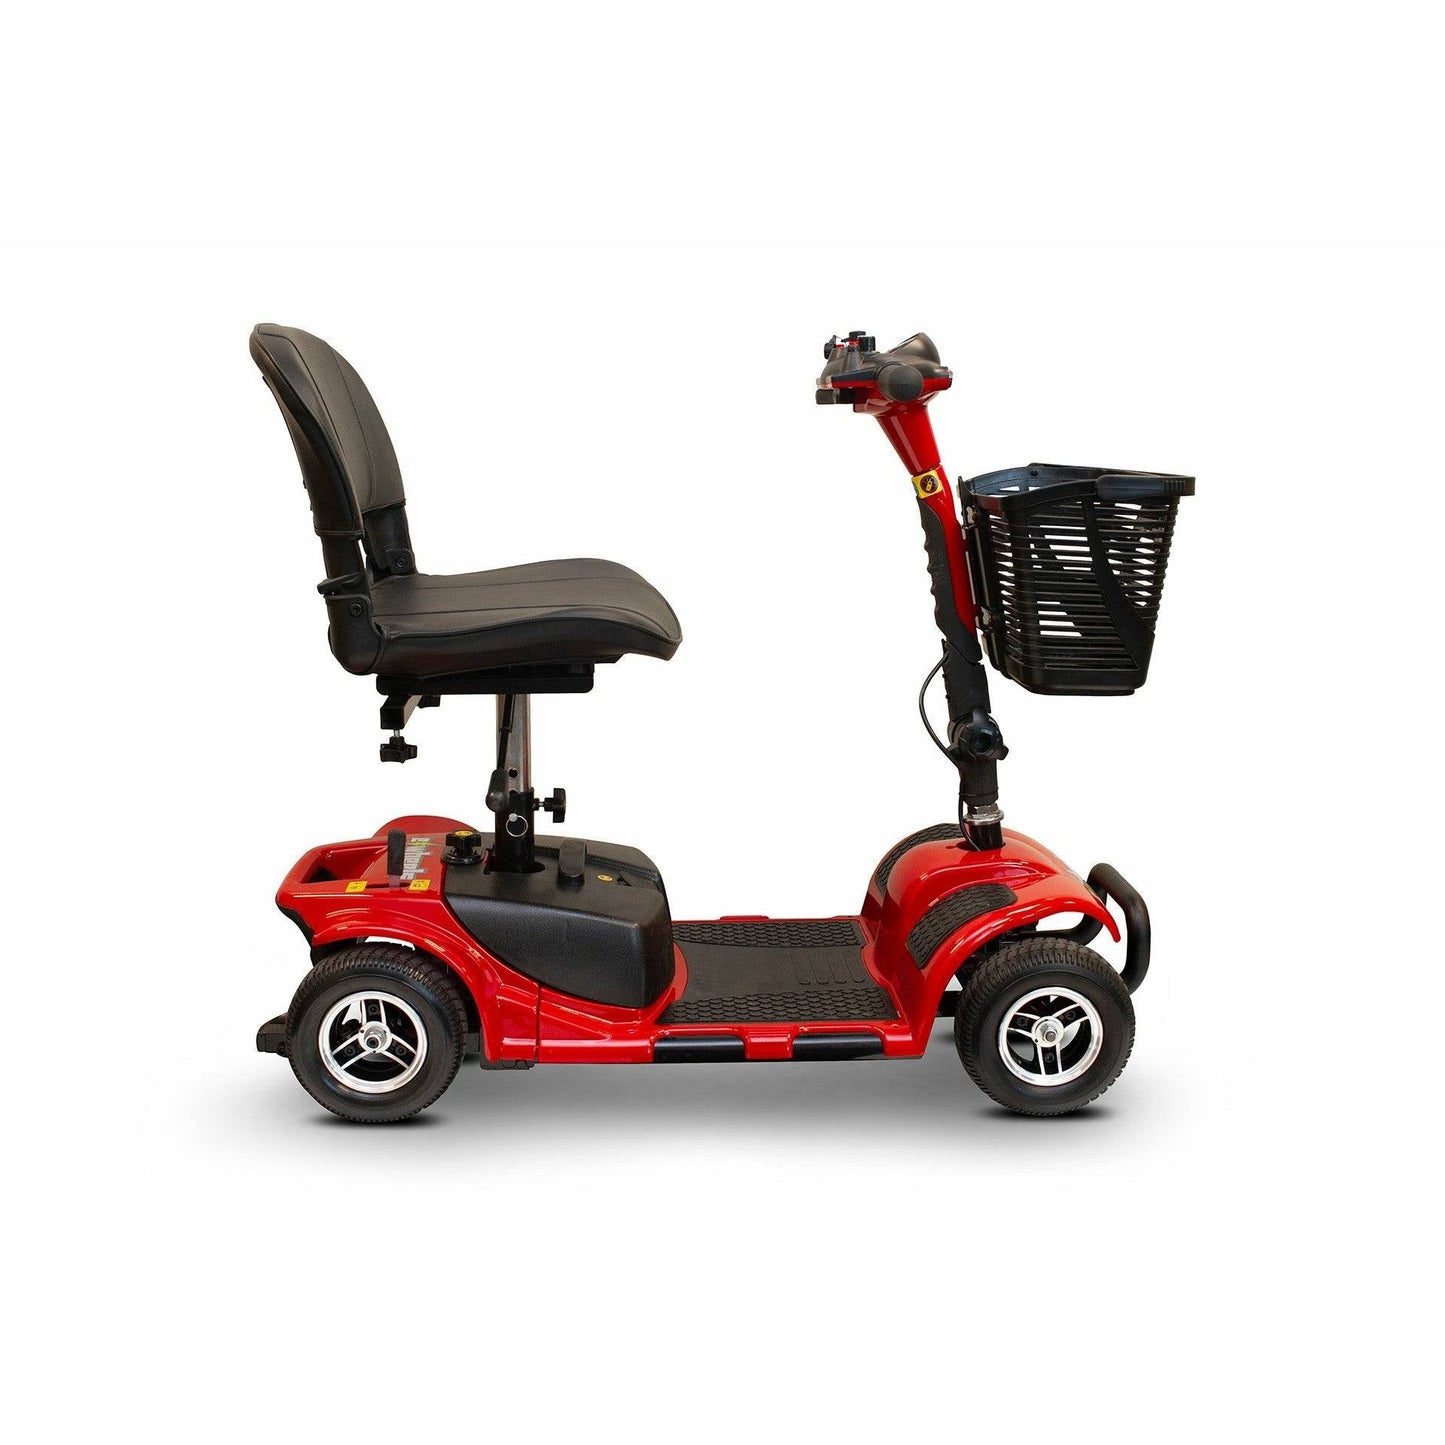 EWheels EW-M34 Travel Mobility Scooter Side View